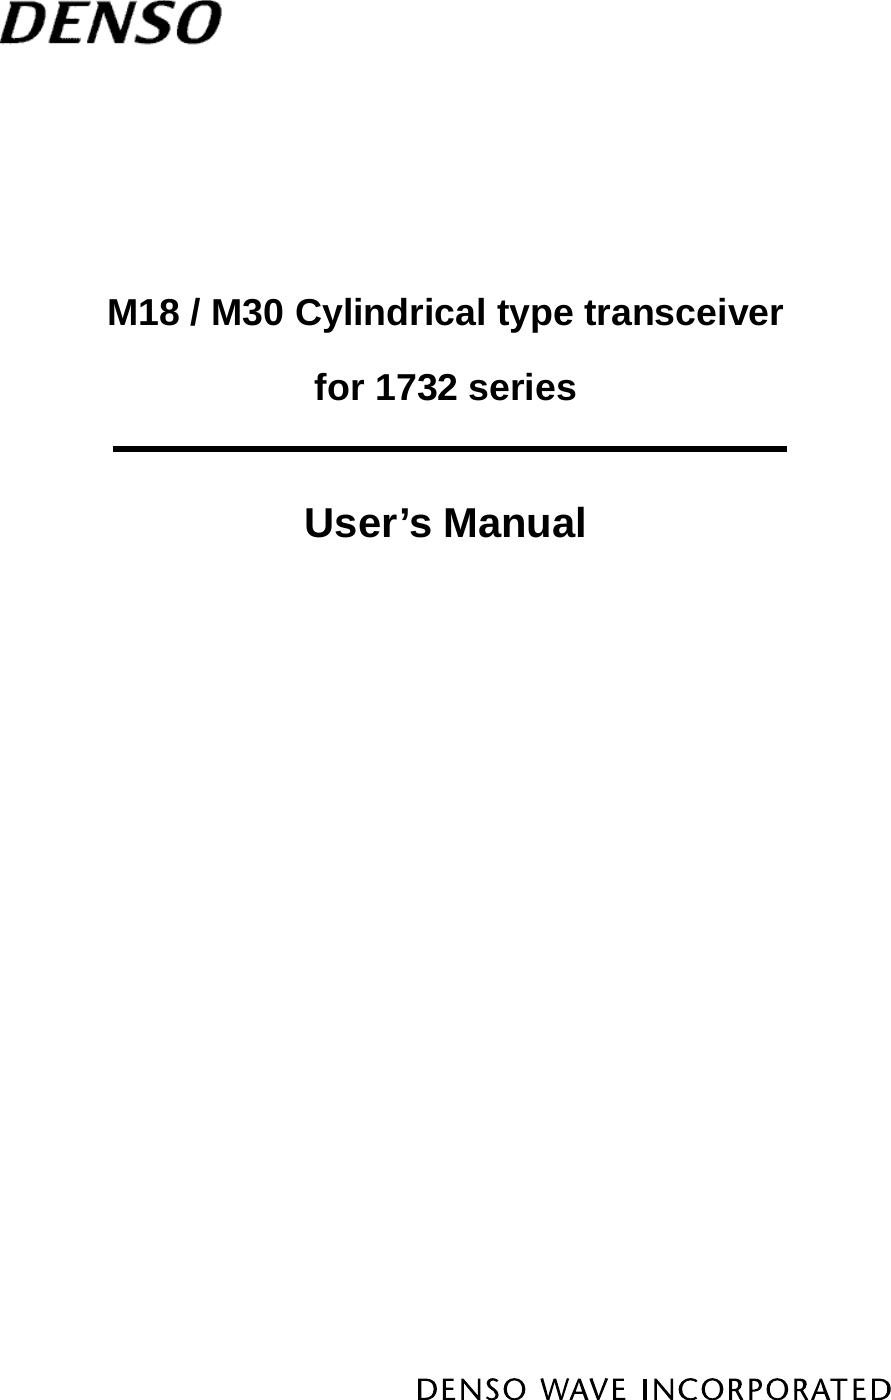       M18 / M30 Cylindrical type transceiver for 1732 series   User’s Manual  